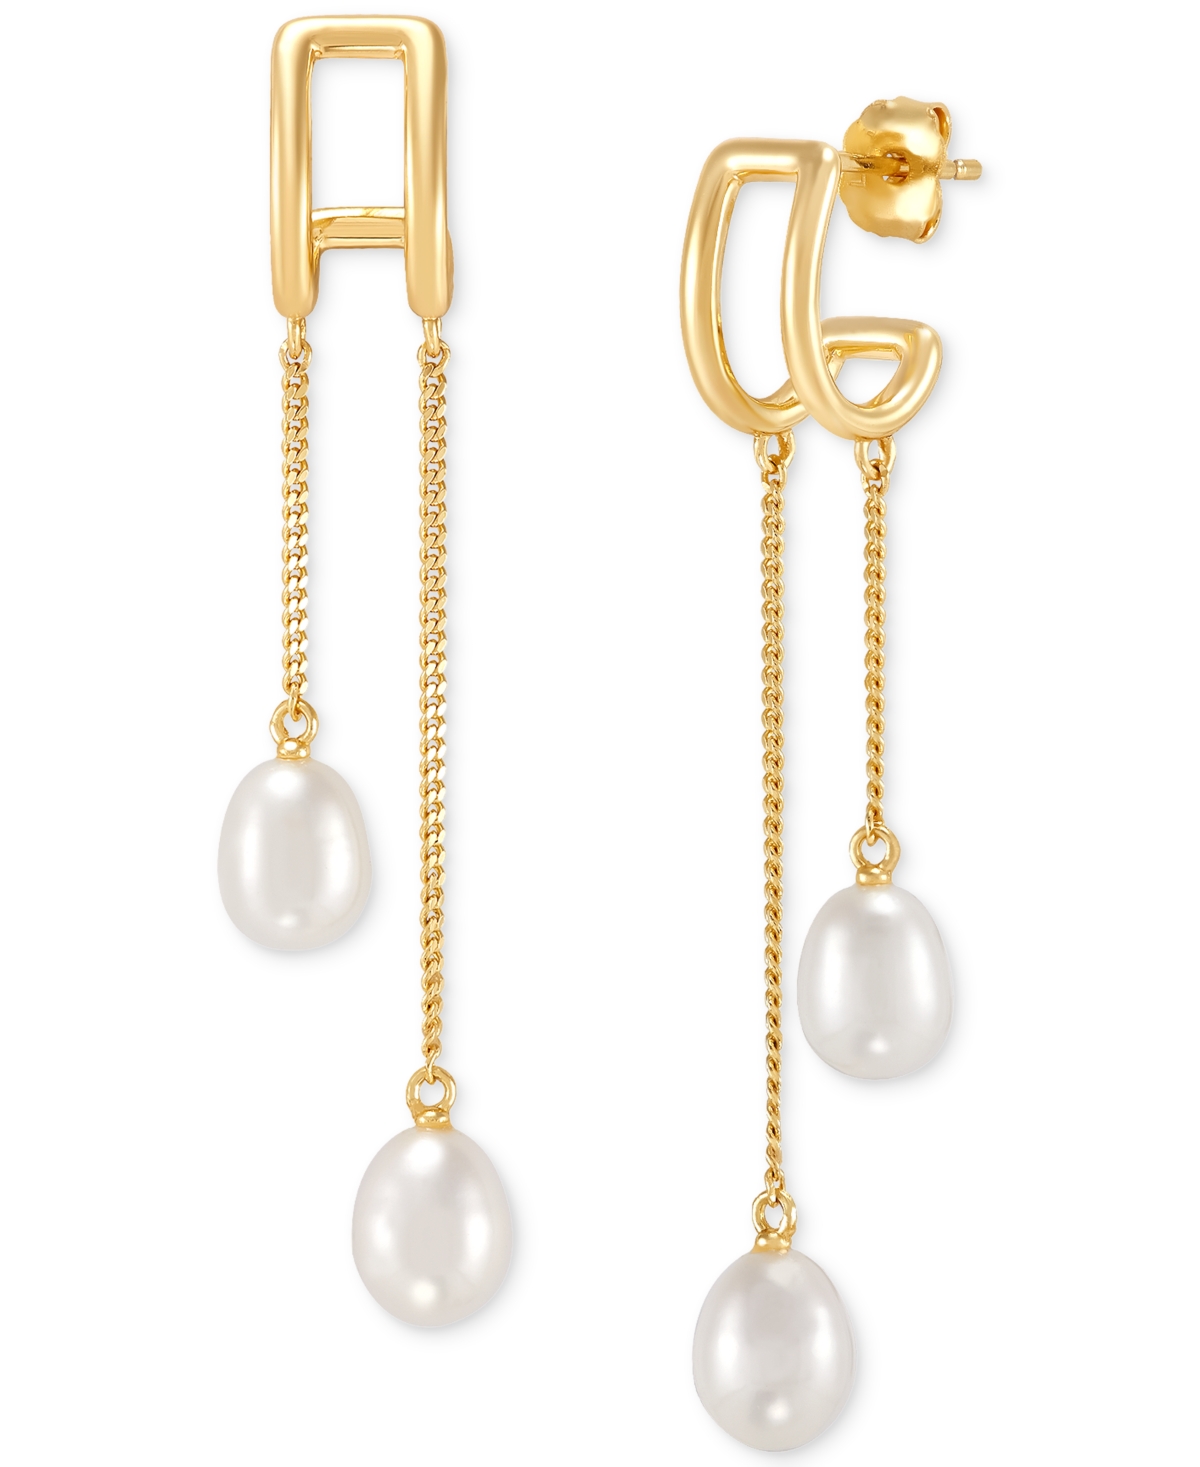 Cultured Freshwater Pearl (7 x 5mm) Chain Drop Earrings in 14k Gold-Plated Sterling Silver, Created for Macy's - Gold Over Silver